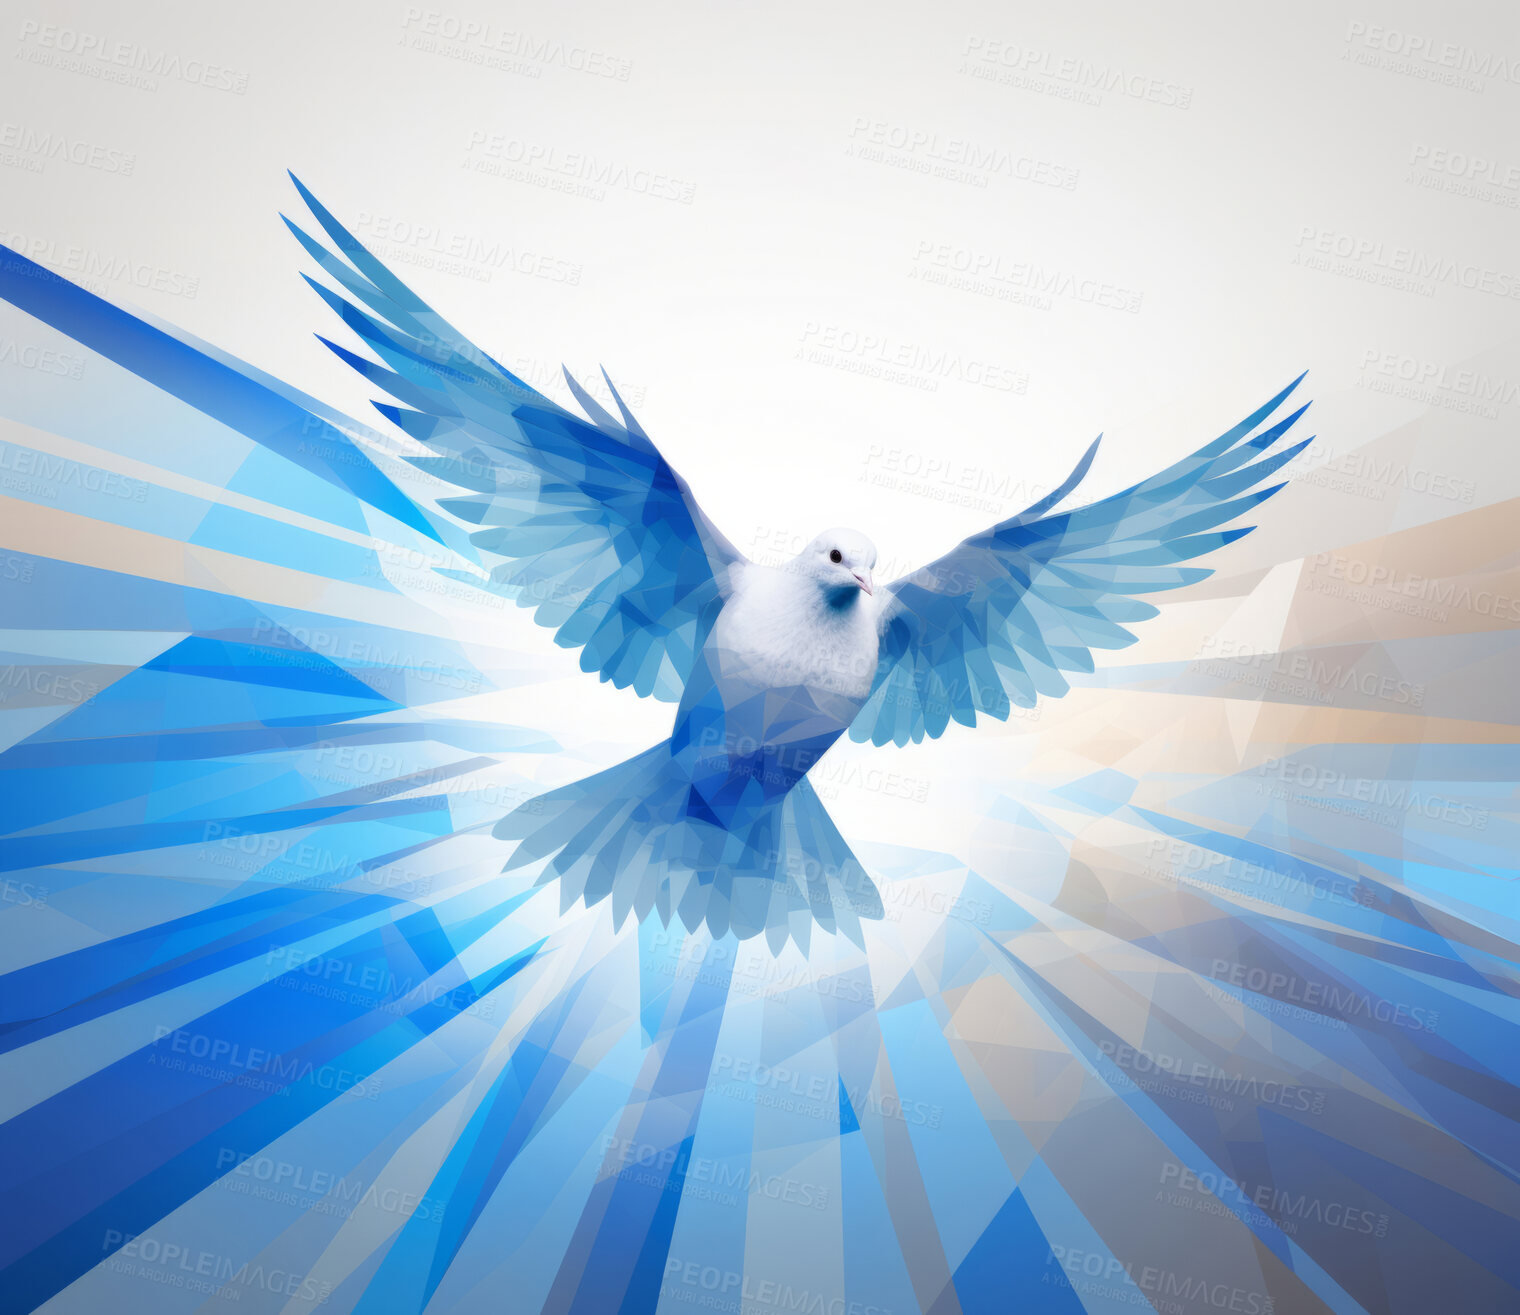 Buy stock photo Illustration of flying blue dove. Symbol for peace. Peace concept.